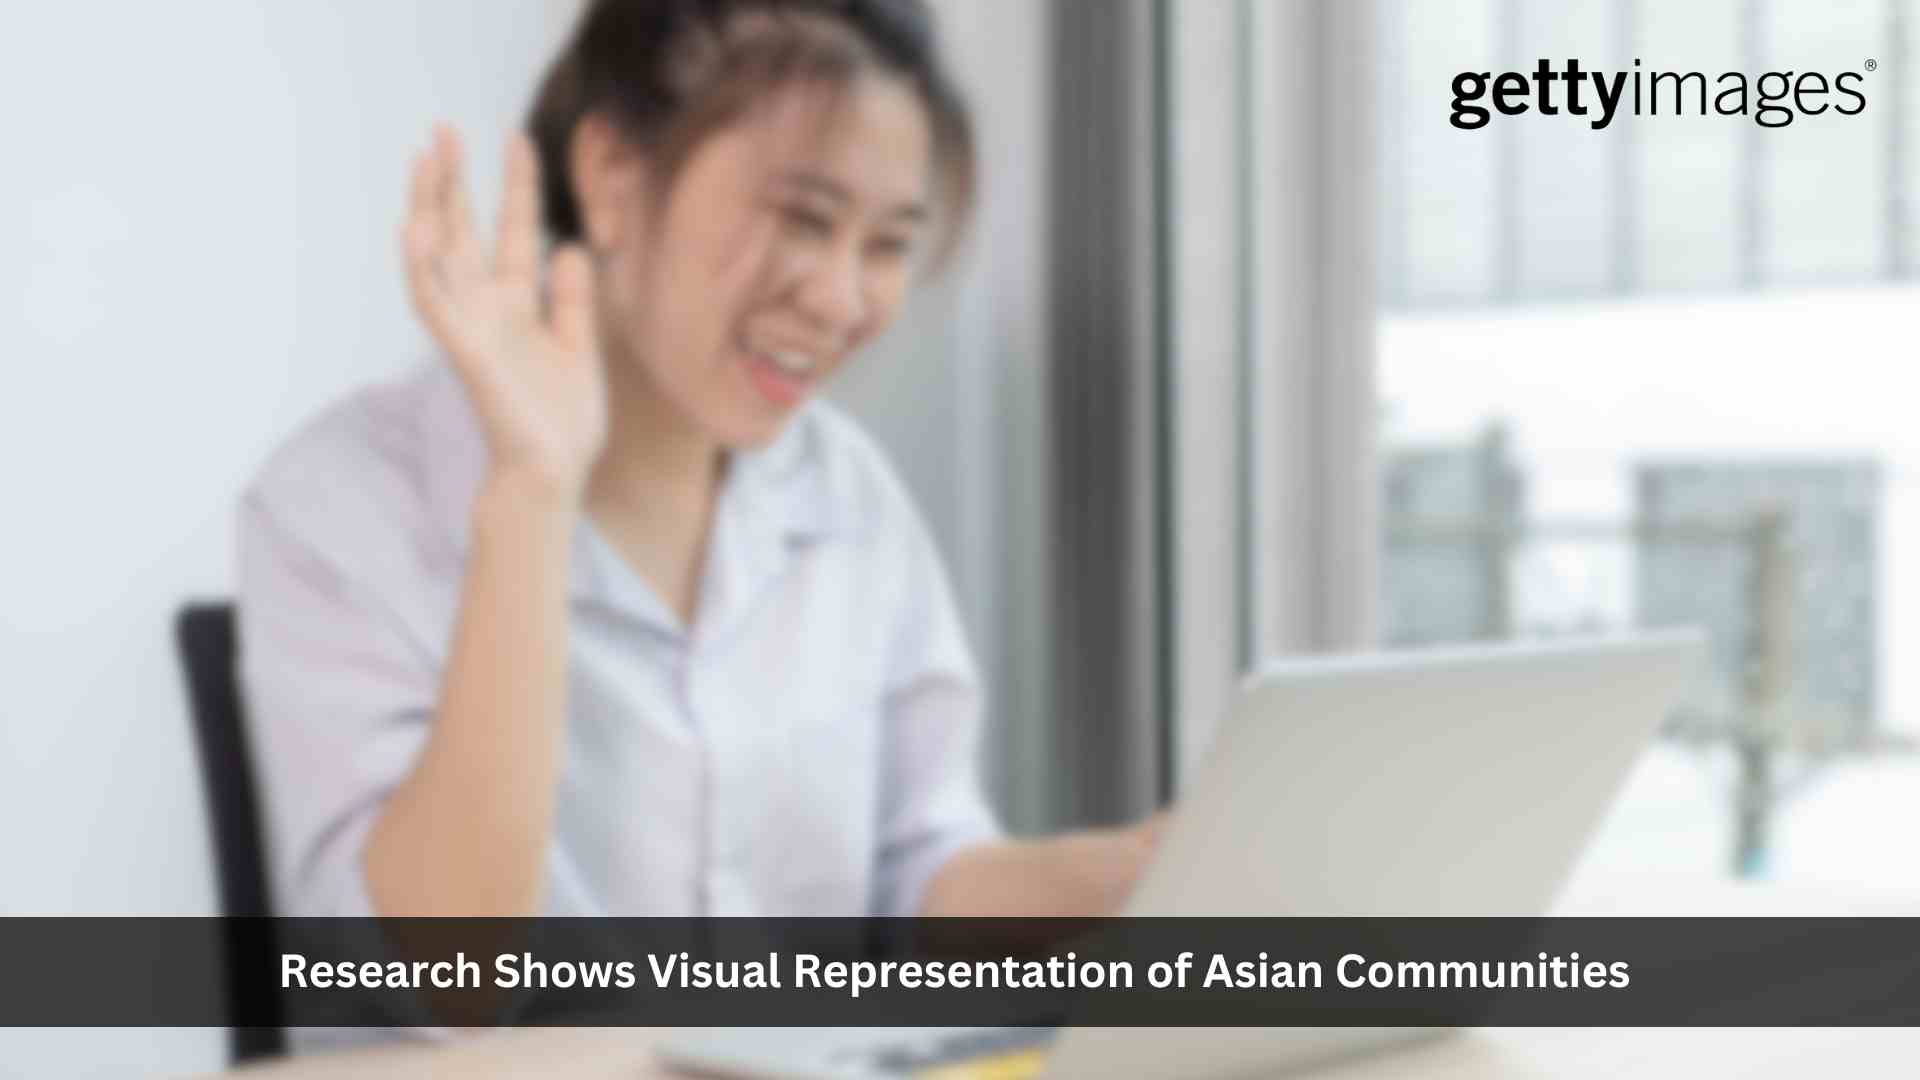 New Research from Getty Images Shows that Visual Representation of Asian Communities in APAC Advertising Remains Stereotypical